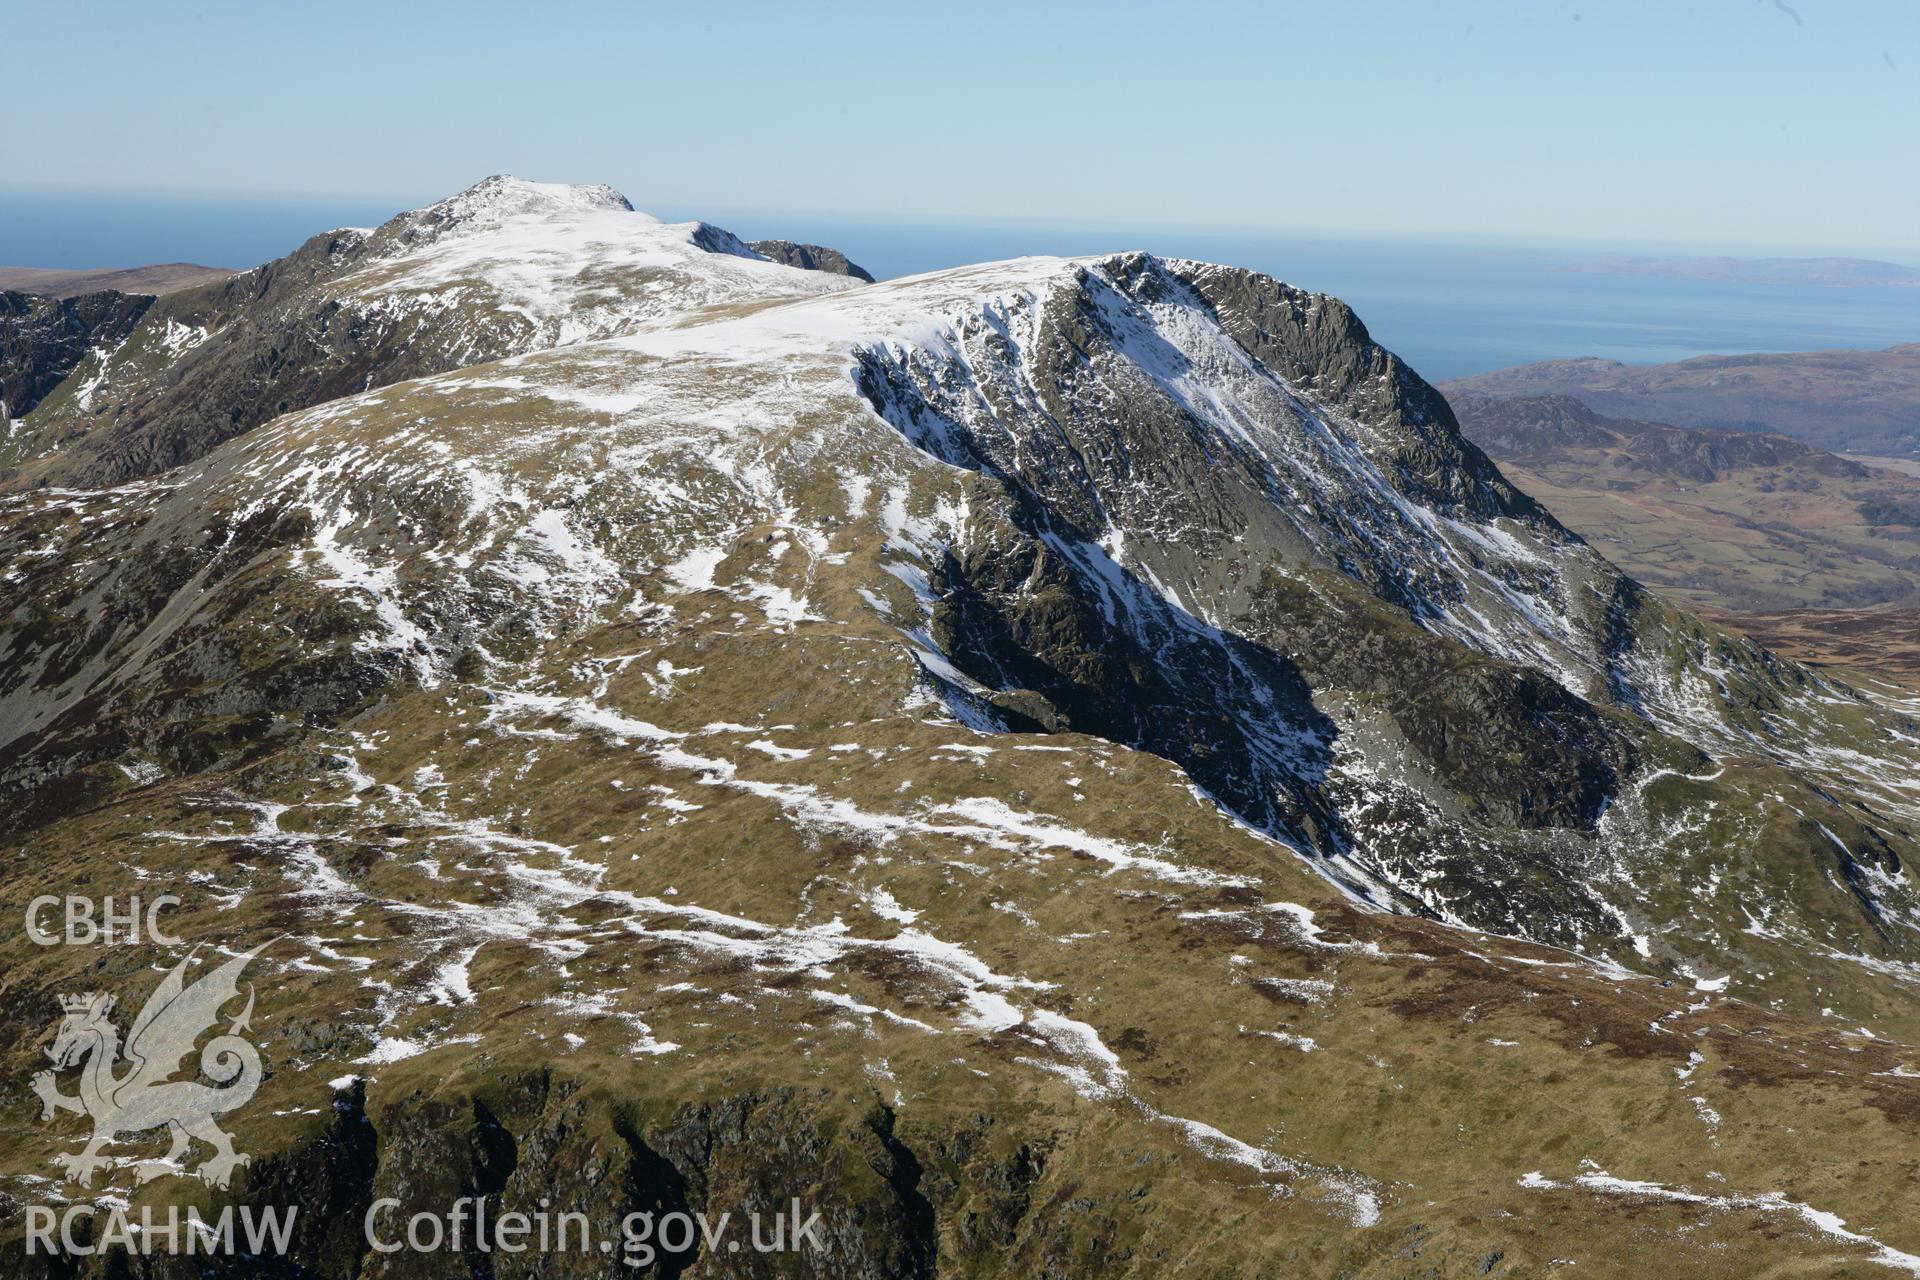 RCAHMW colour oblique photograph of Cadair Idris. Taken by Toby Driver on 08/03/2010.